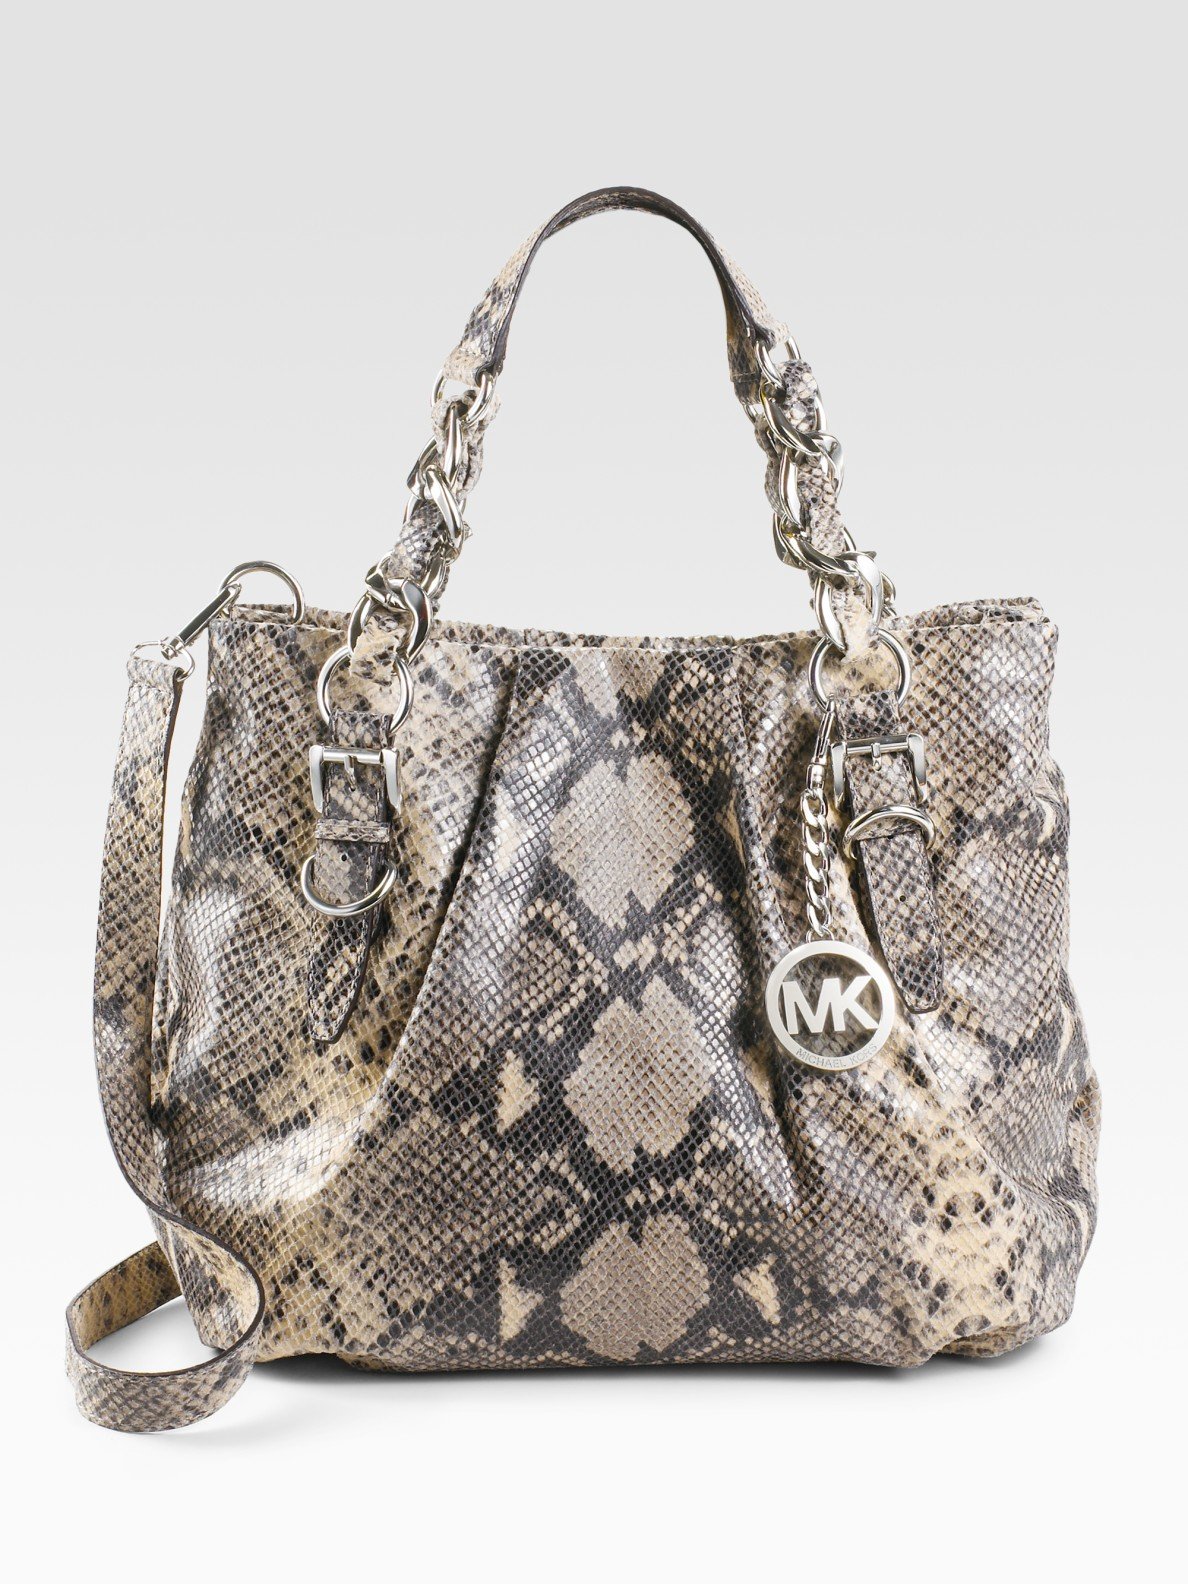 Lyst - Michael michael kors Embossed Python Leather Tote Bag in Natural